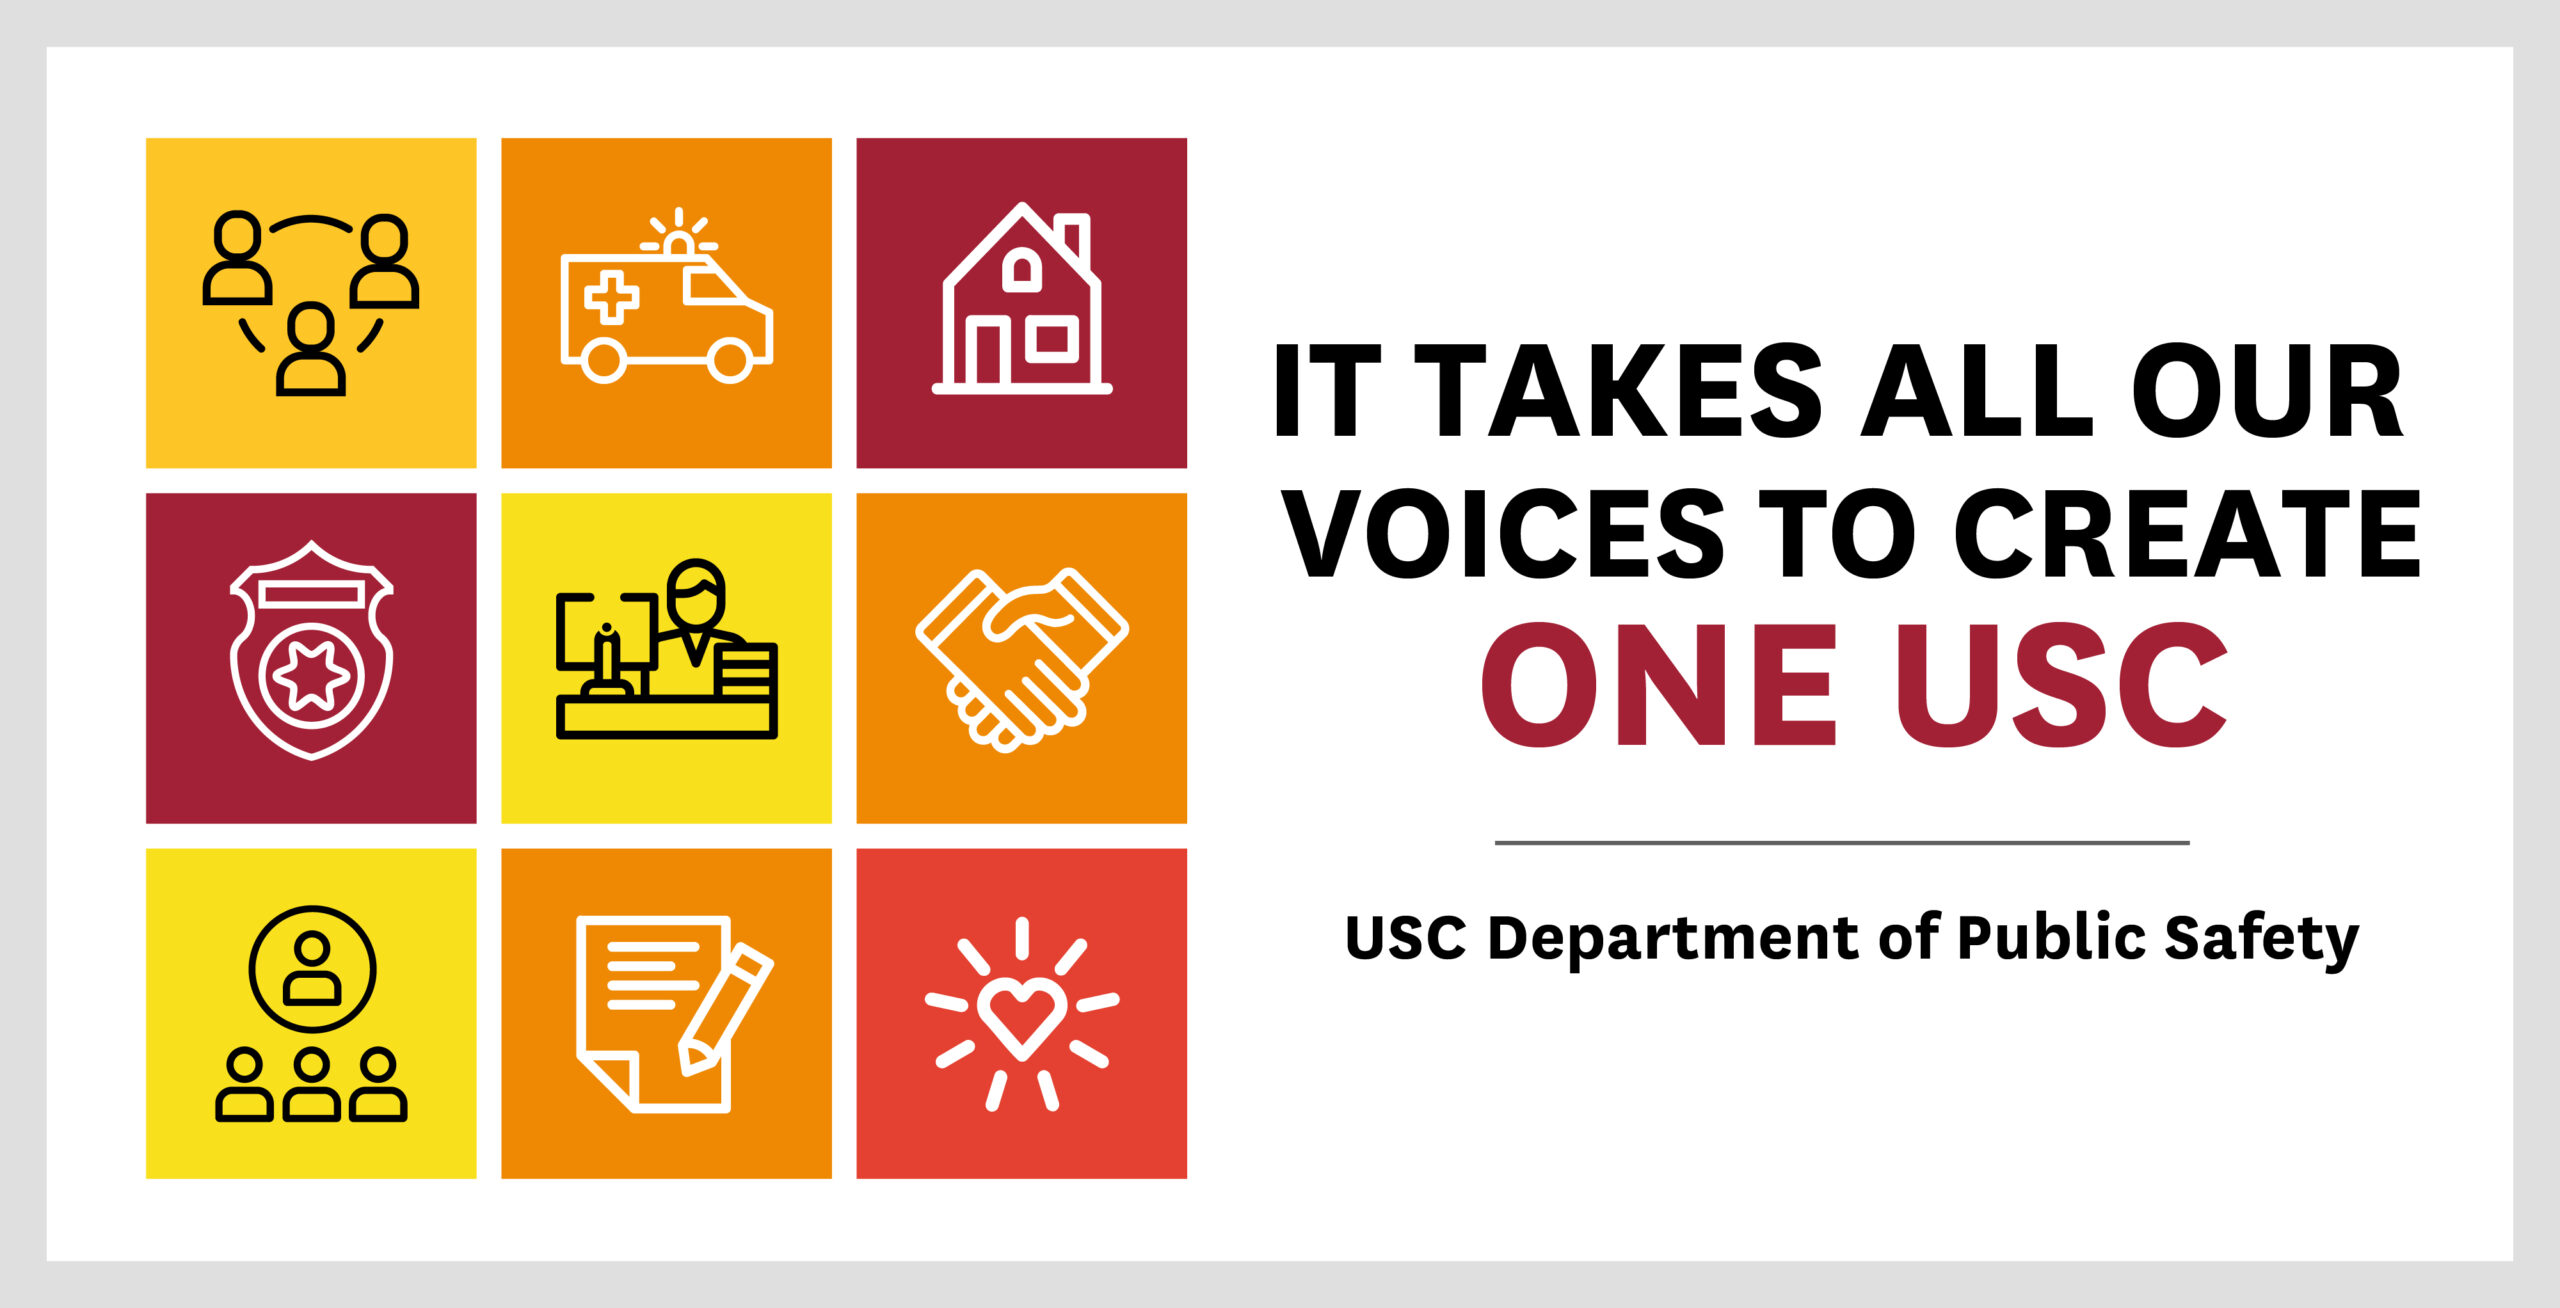 9-icons-it-takes-all-our-voices to create-one-USC